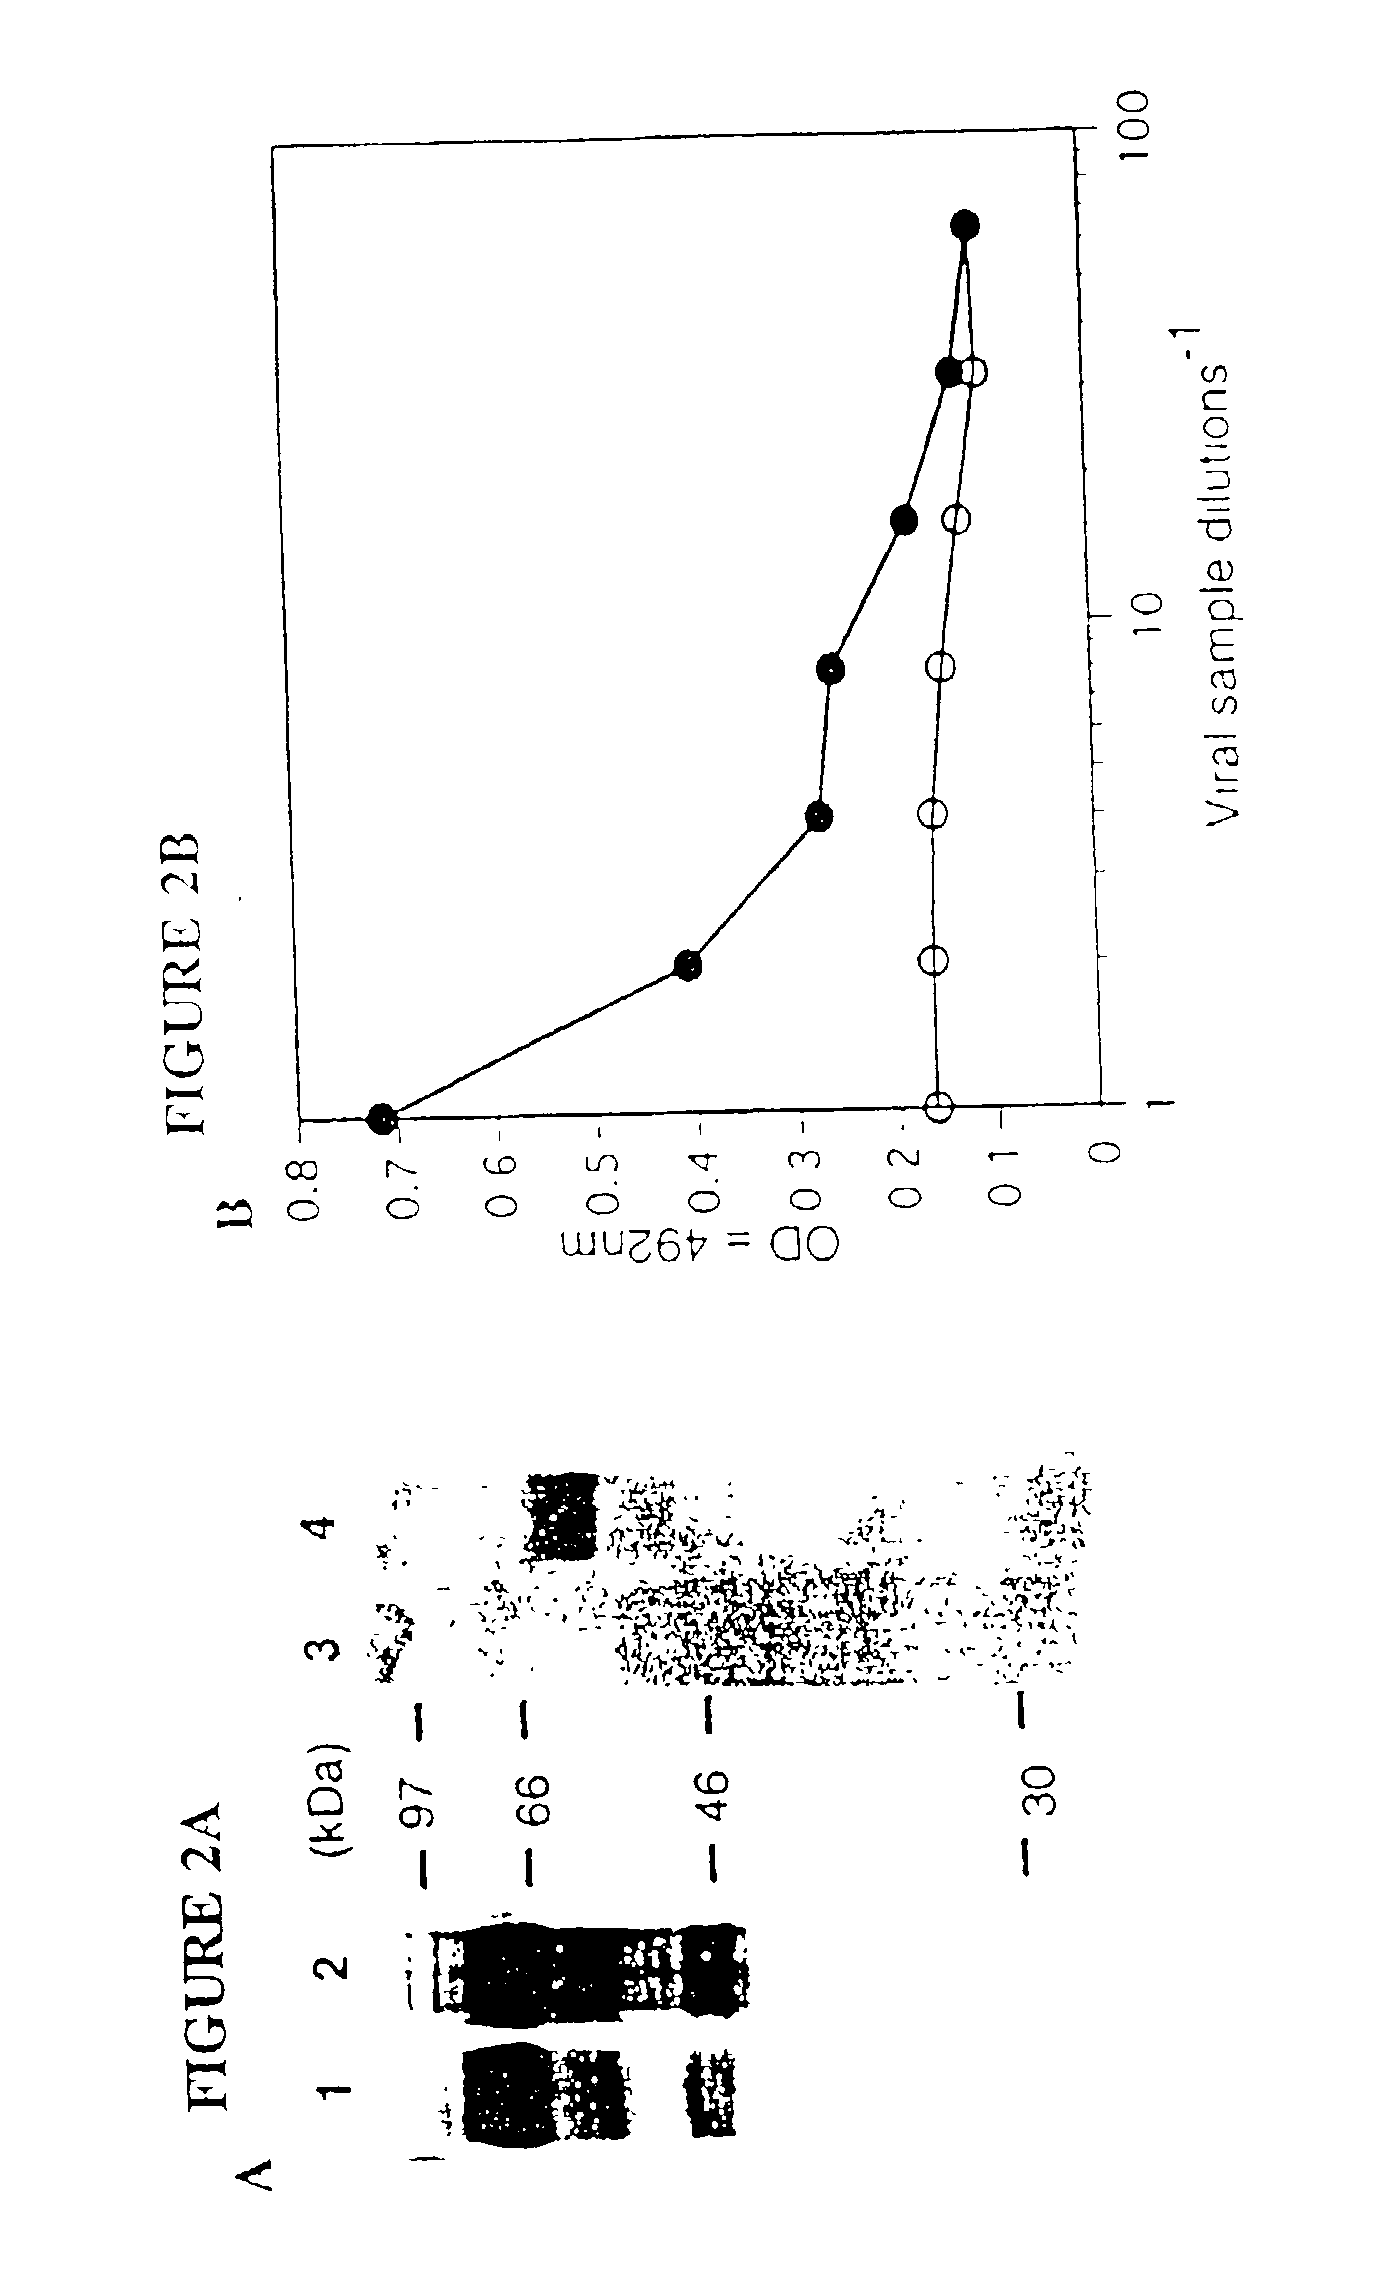 Viral vectors having chimeric envelope proteins containing the IgG-binding domain of protein A